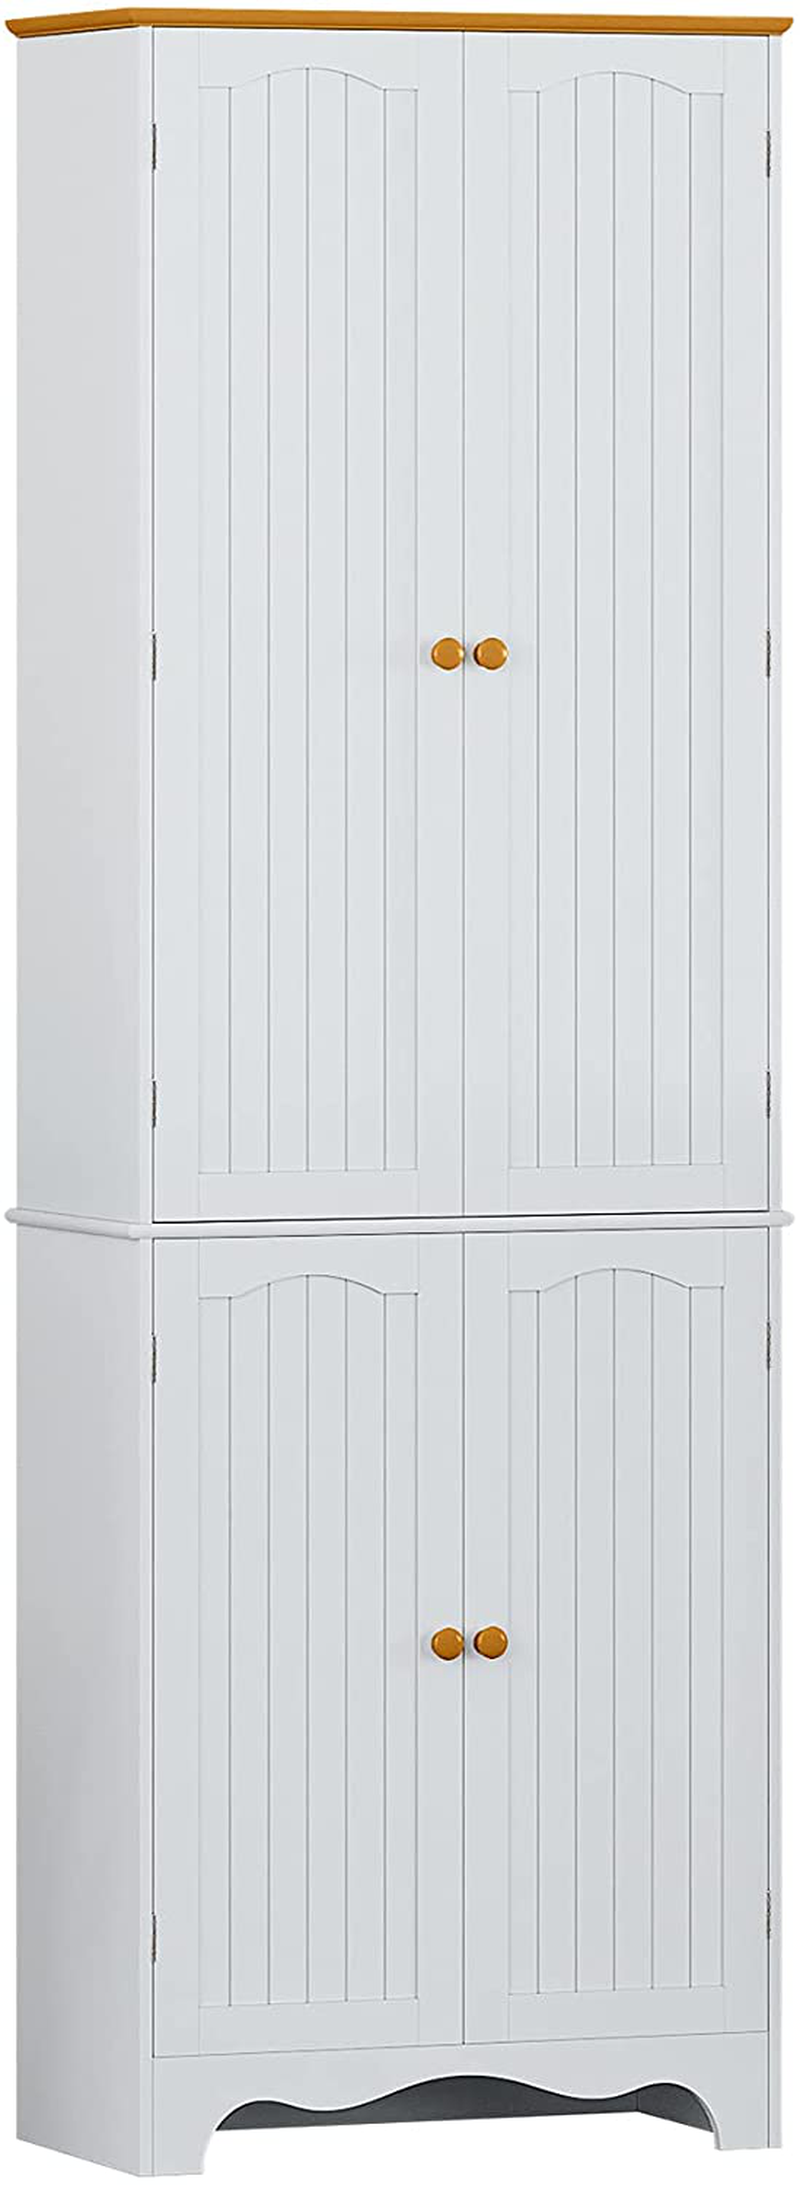 HOMEFORT 72" Tall Pantry Cabinet, Wood Kitchen Pantry, Freestanding Kitchen Cupboard with 2 Cabinets and Adjustable Storage Shelves, Space Saving Floor Cabinet,In Creamy White Home & Garden > Kitchen & Dining > Food Storage HOMEFORT Creamy White  